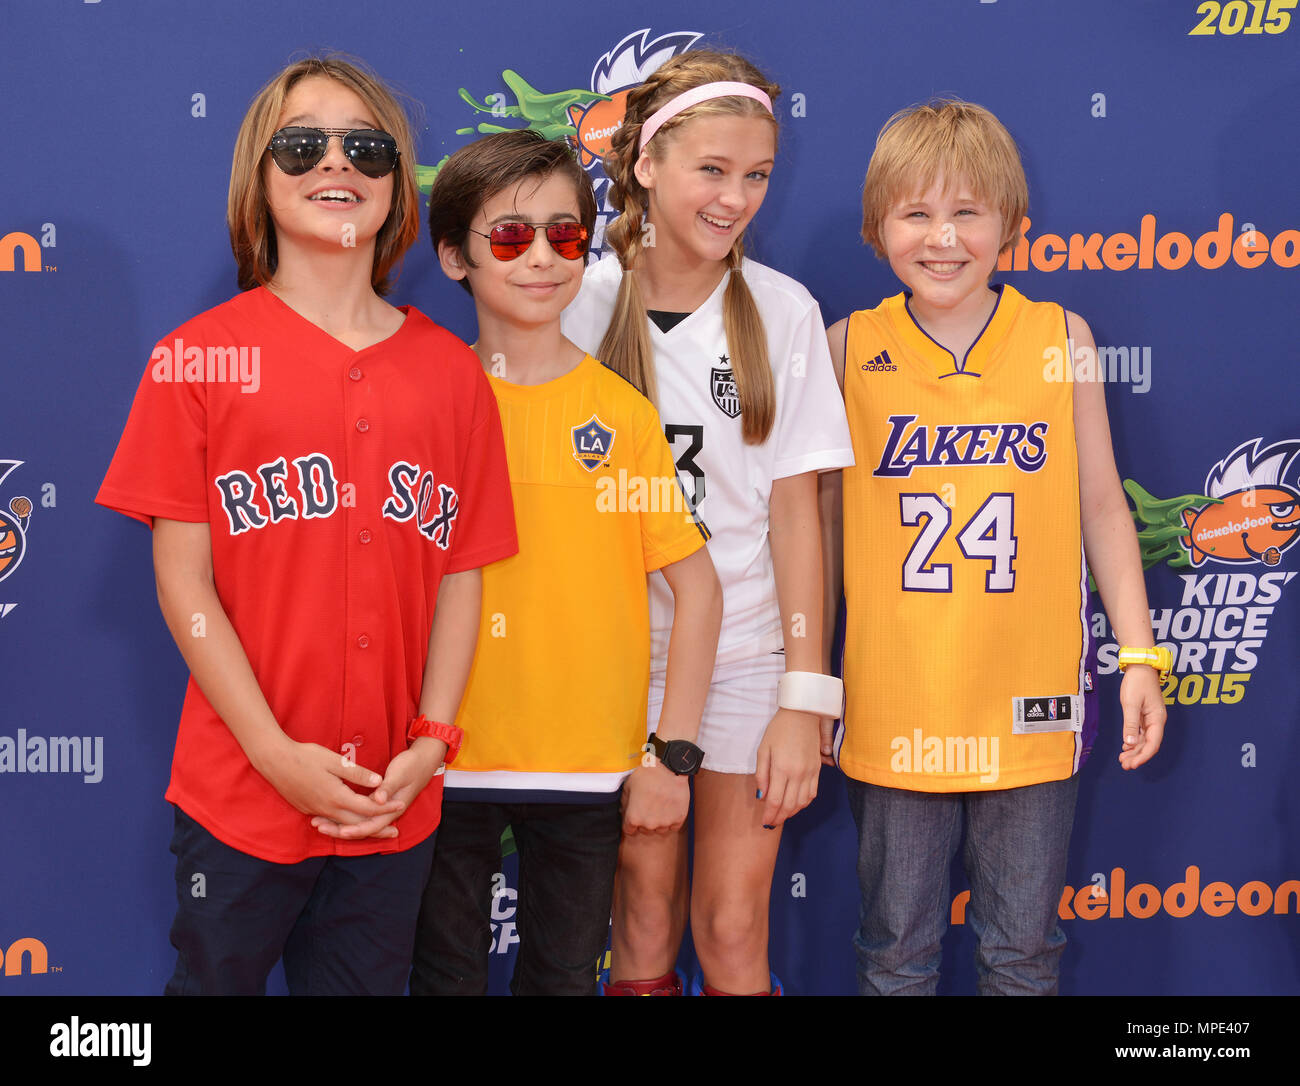 Nicky, Ricky, Dicky, Dawn A at the 2015 Nickelodeon Kid's Choice Sports  awards at UCLA Paley center in Los Angeles. July 16, 2015.Nicky, Ricky,  Dicky, Dawn A Event in Hollywood Life -